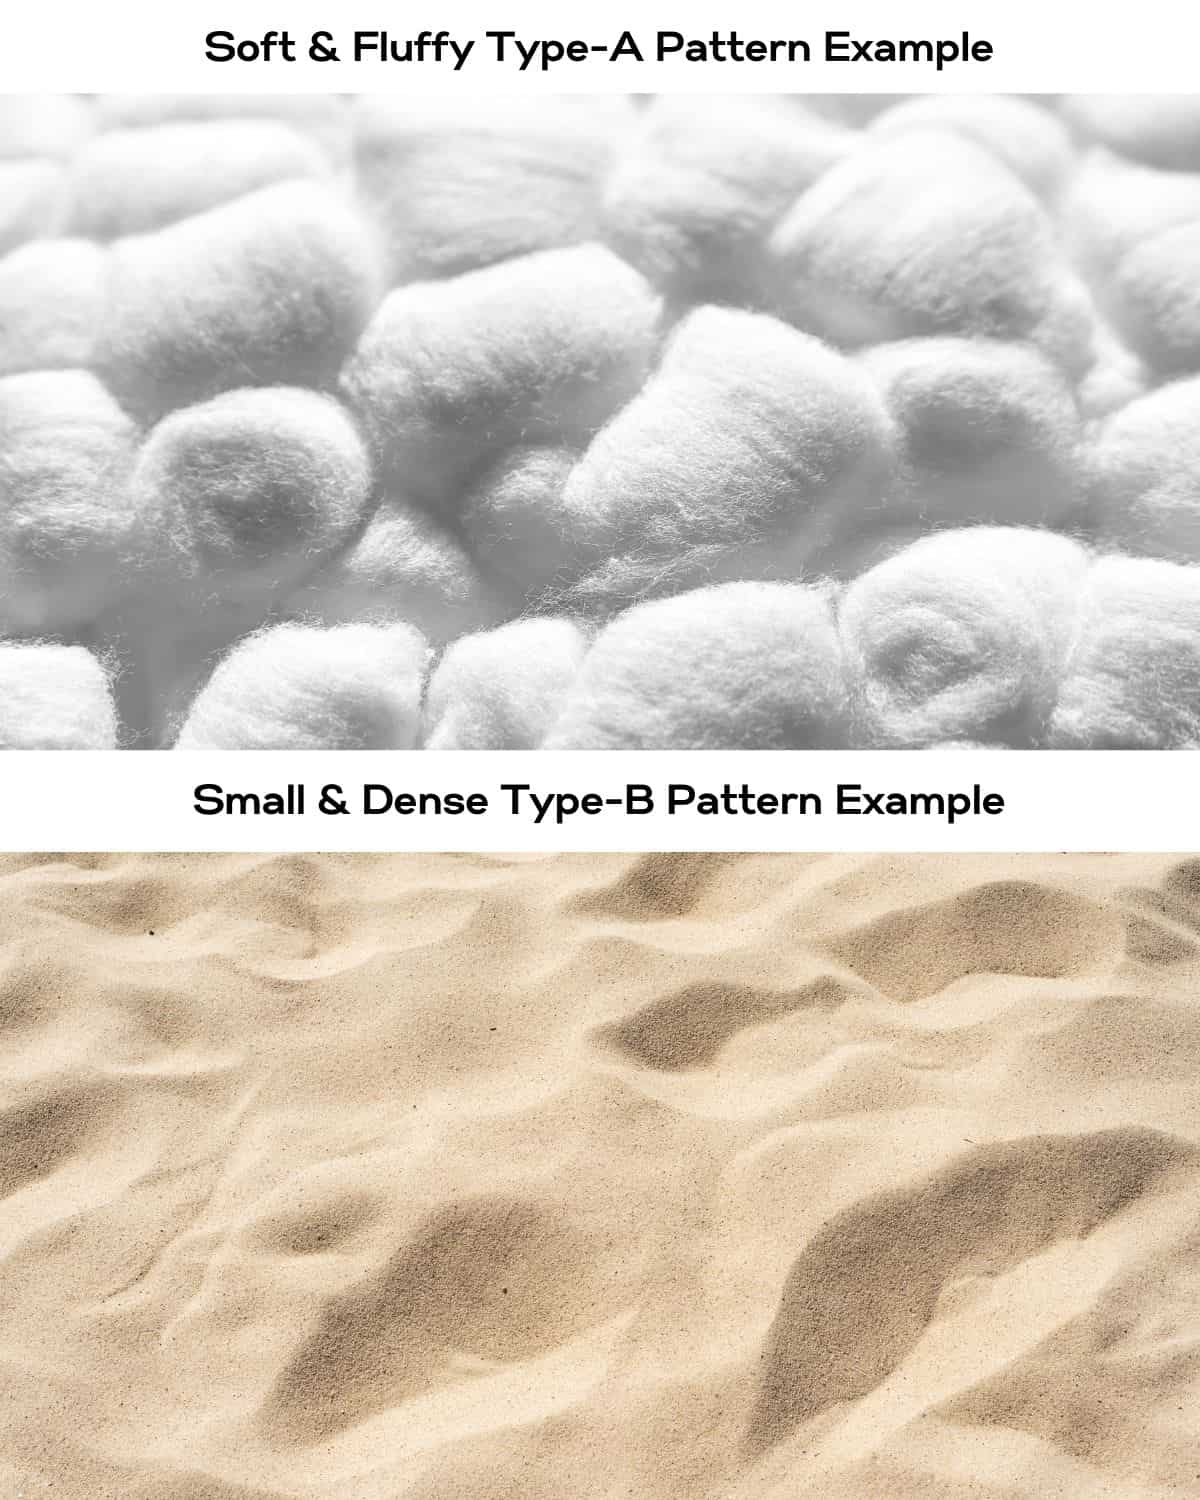 picture of cotton balls and sand